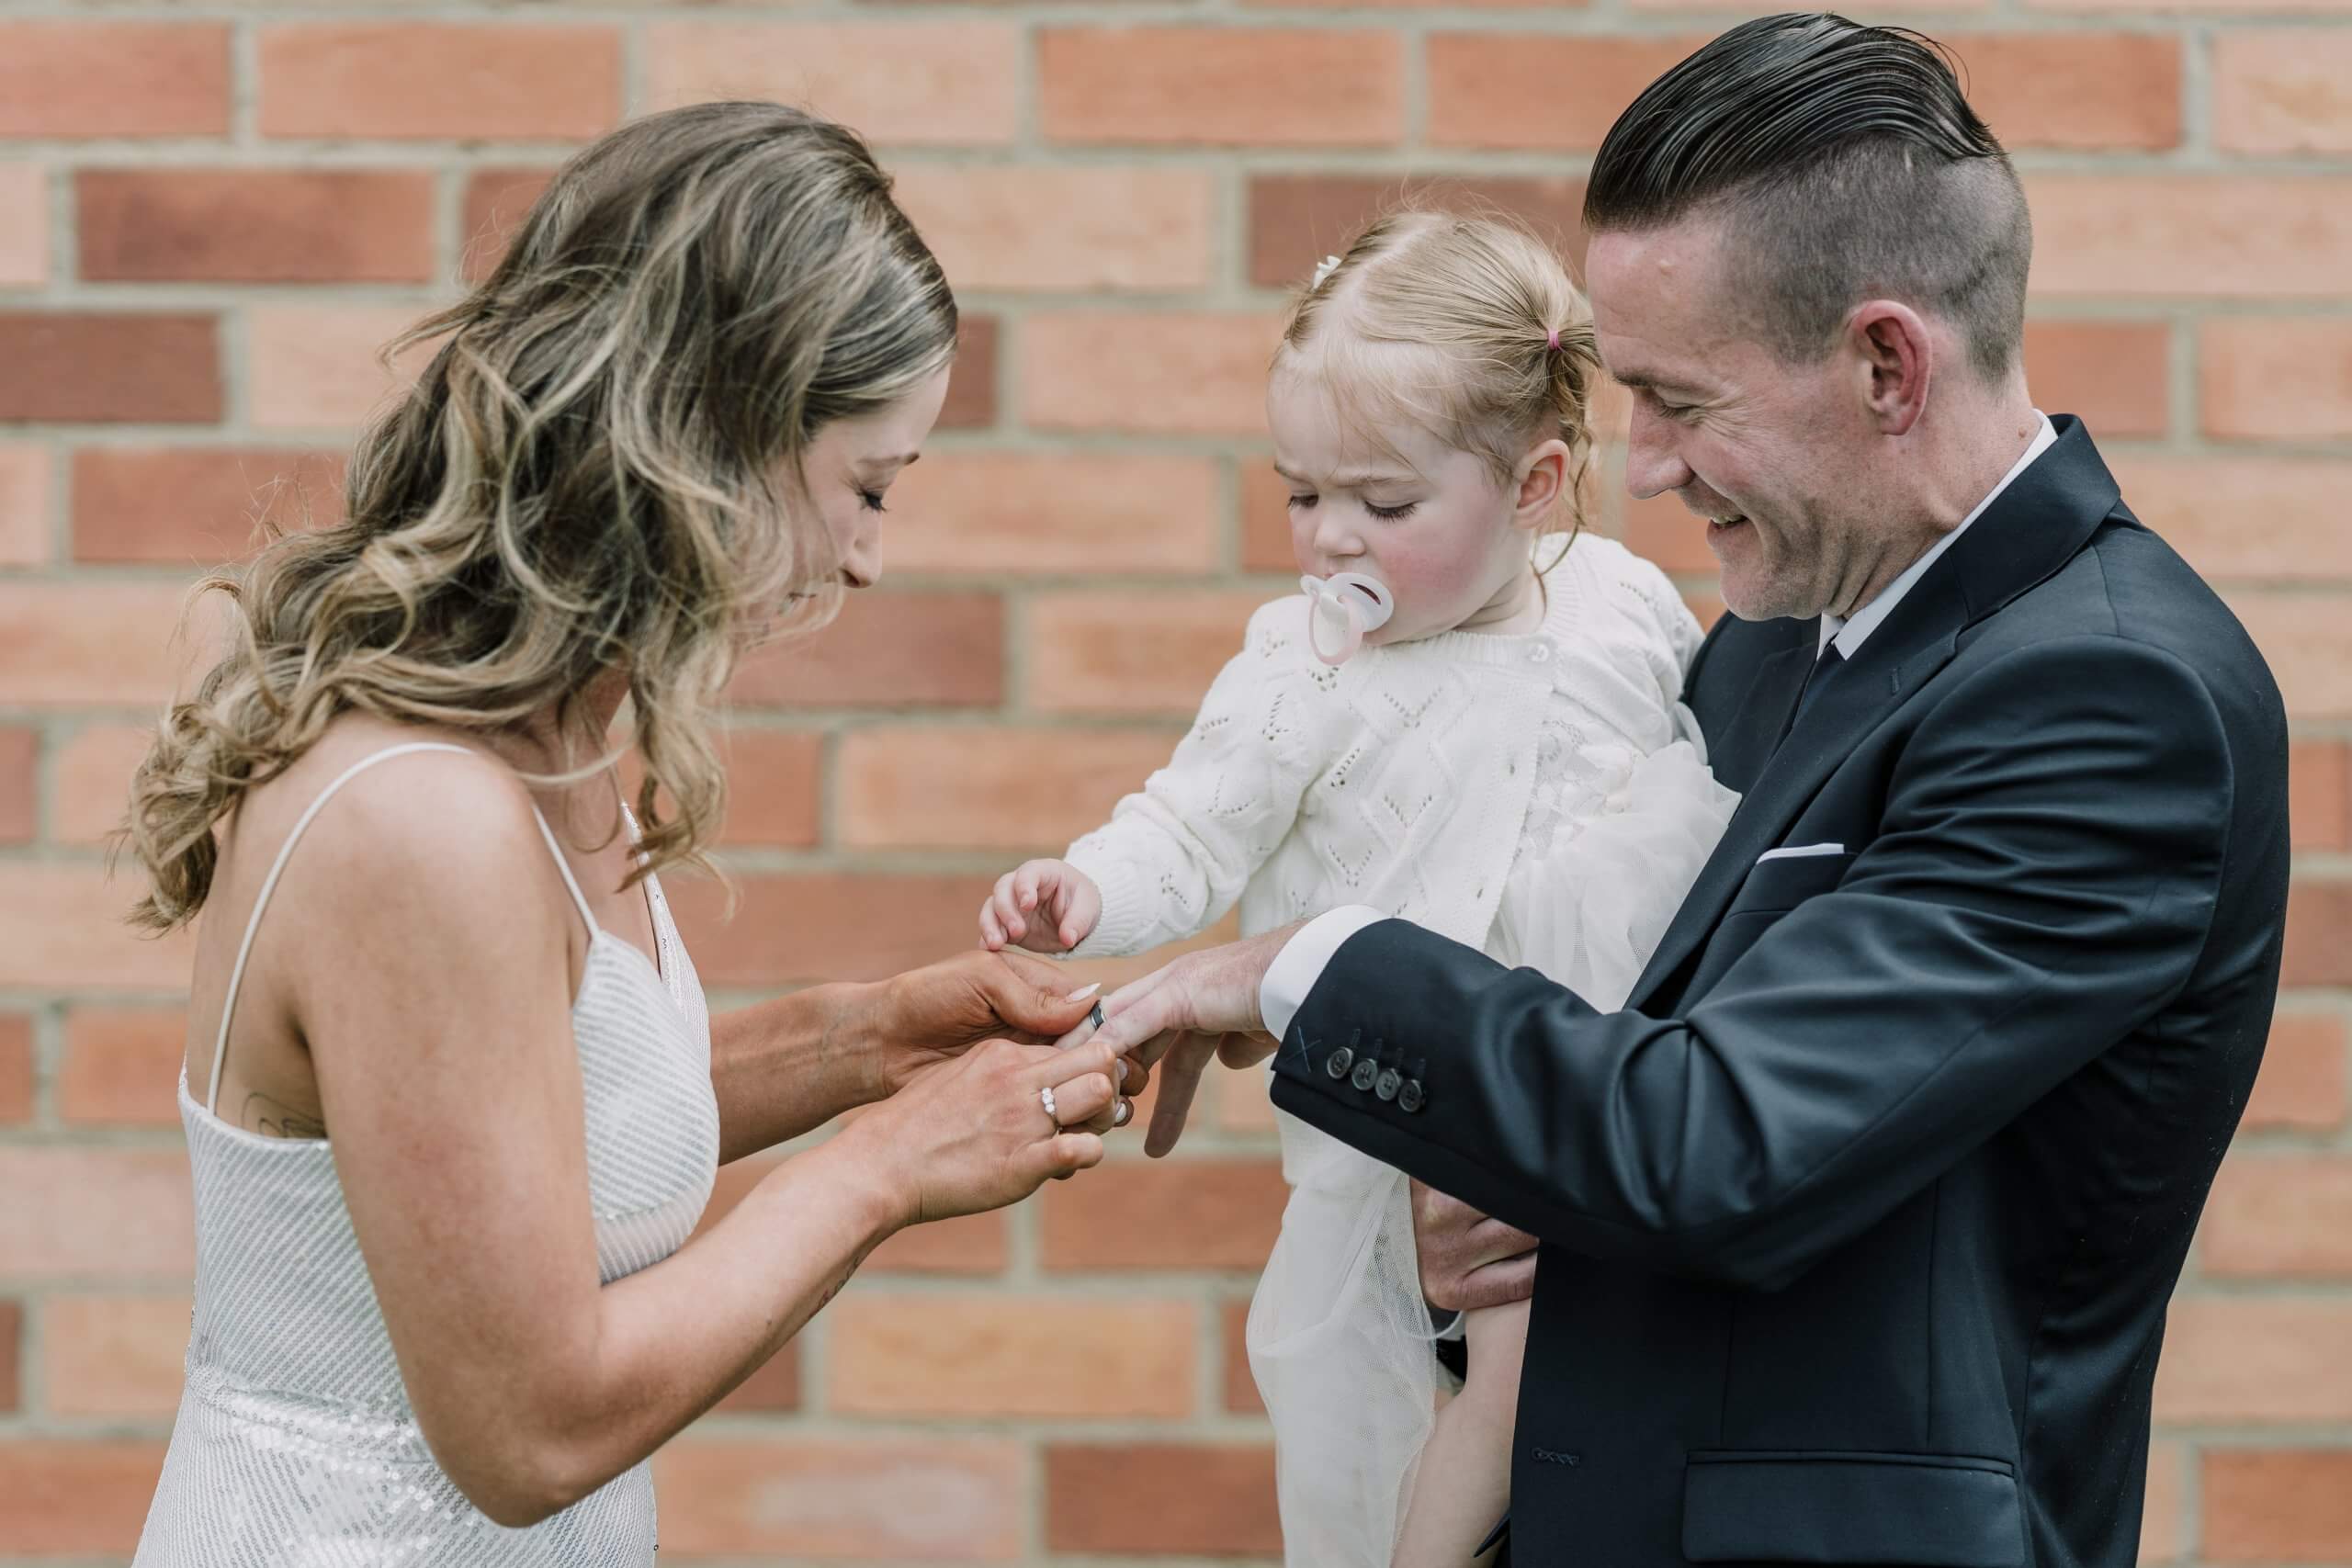 The lovely bride putting the wedding ring to the groom's finger while he's carrying their lovely daughter, captured by Black Avenue Productions